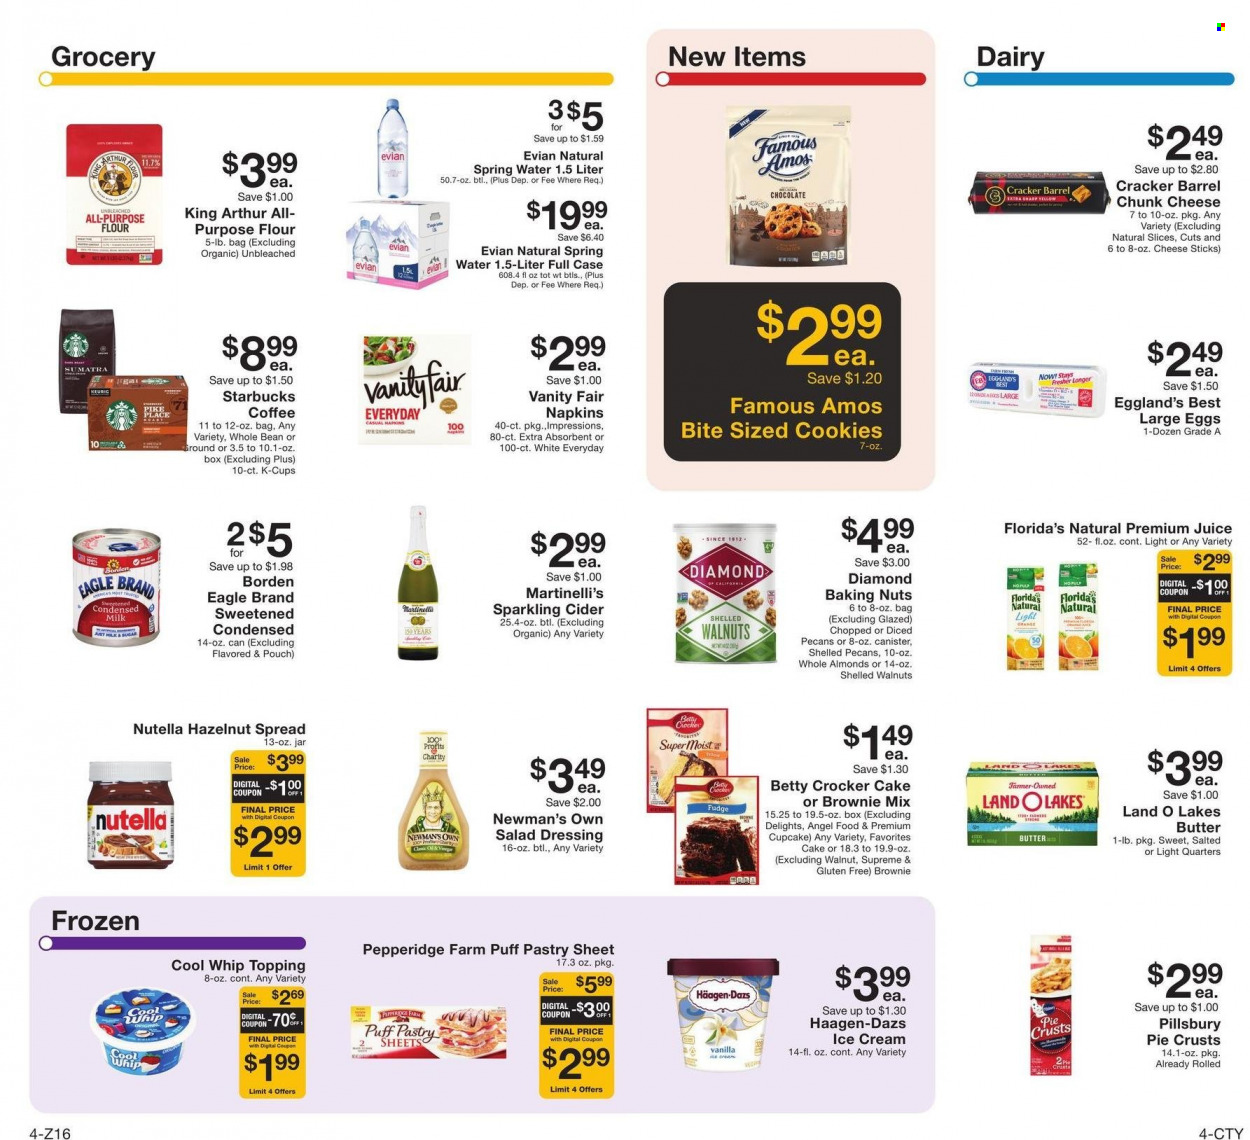 thumbnail - Fairway Market Flyer - 11/12/2021 - 11/18/2021 - Sales products - cake, pie, cupcake, Angel Food, brownie mix, Pillsbury, chunk cheese, milk, large eggs, butter, Cool Whip, puff pastry, ice cream, Häagen-Dazs, cheese sticks, cookies, fudge, Nutella, crackers, Florida's Natural, flour, pie crust, topping, salad dressing, dressing, hazelnut spread, almonds, walnuts, pecans, juice, spring water, Evian, coffee, Starbucks, coffee capsules, K-Cups, Keurig, sparkling cider, sparkling wine, cider. Page 4.